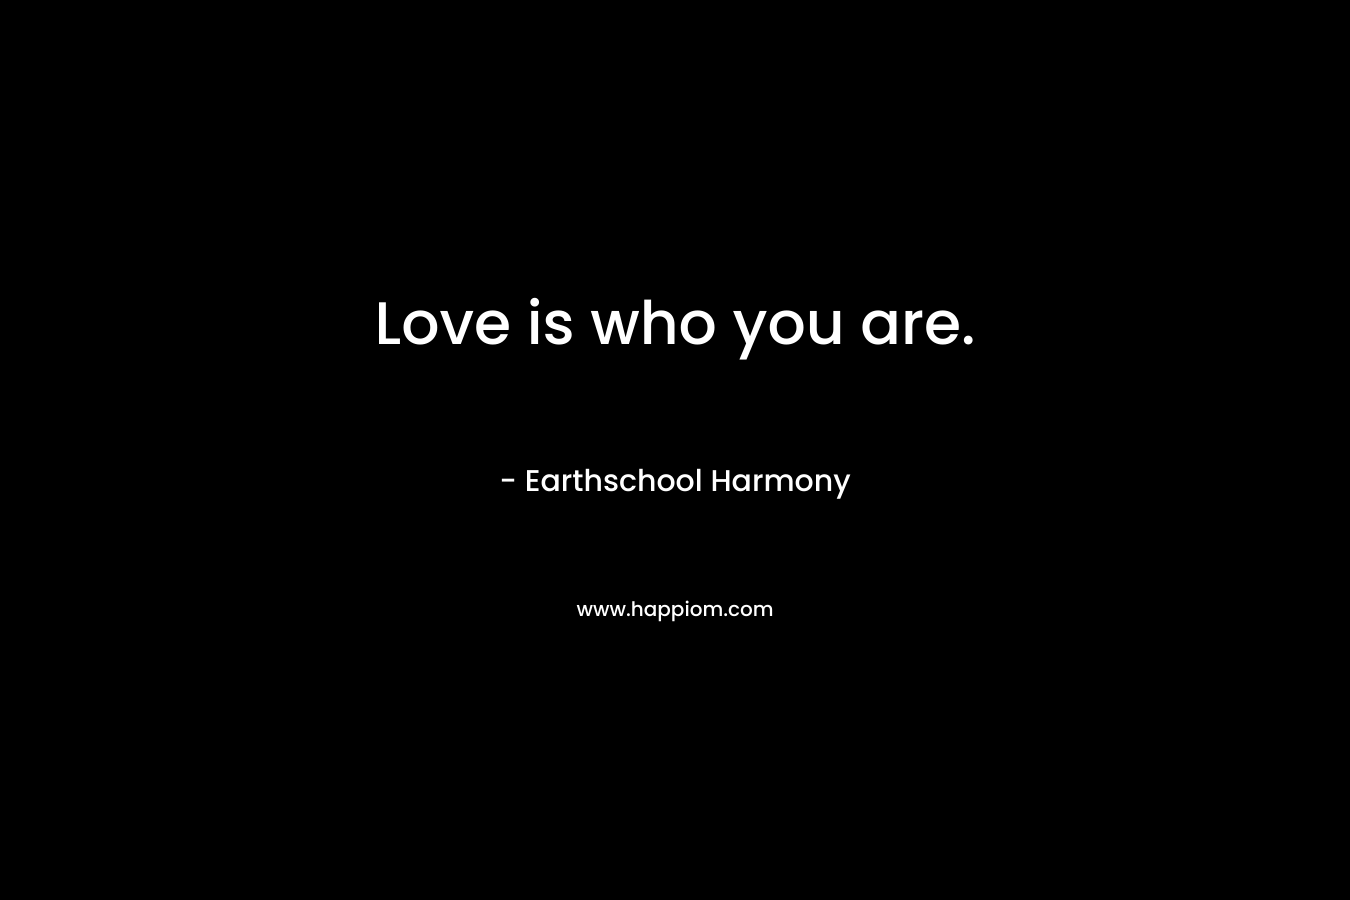 Love is who you are.